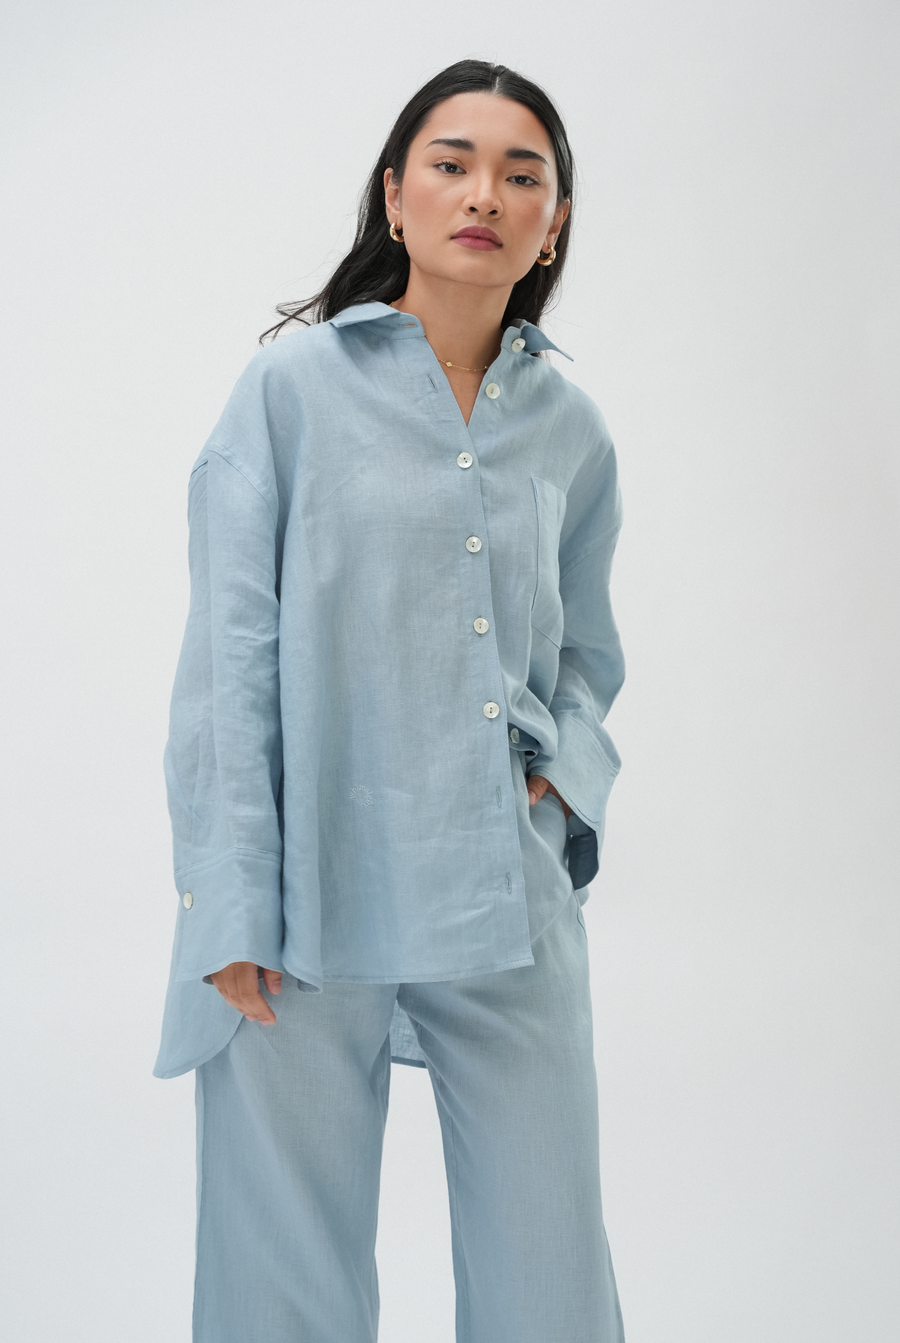 Friday Linen Shirt in Coral Blue